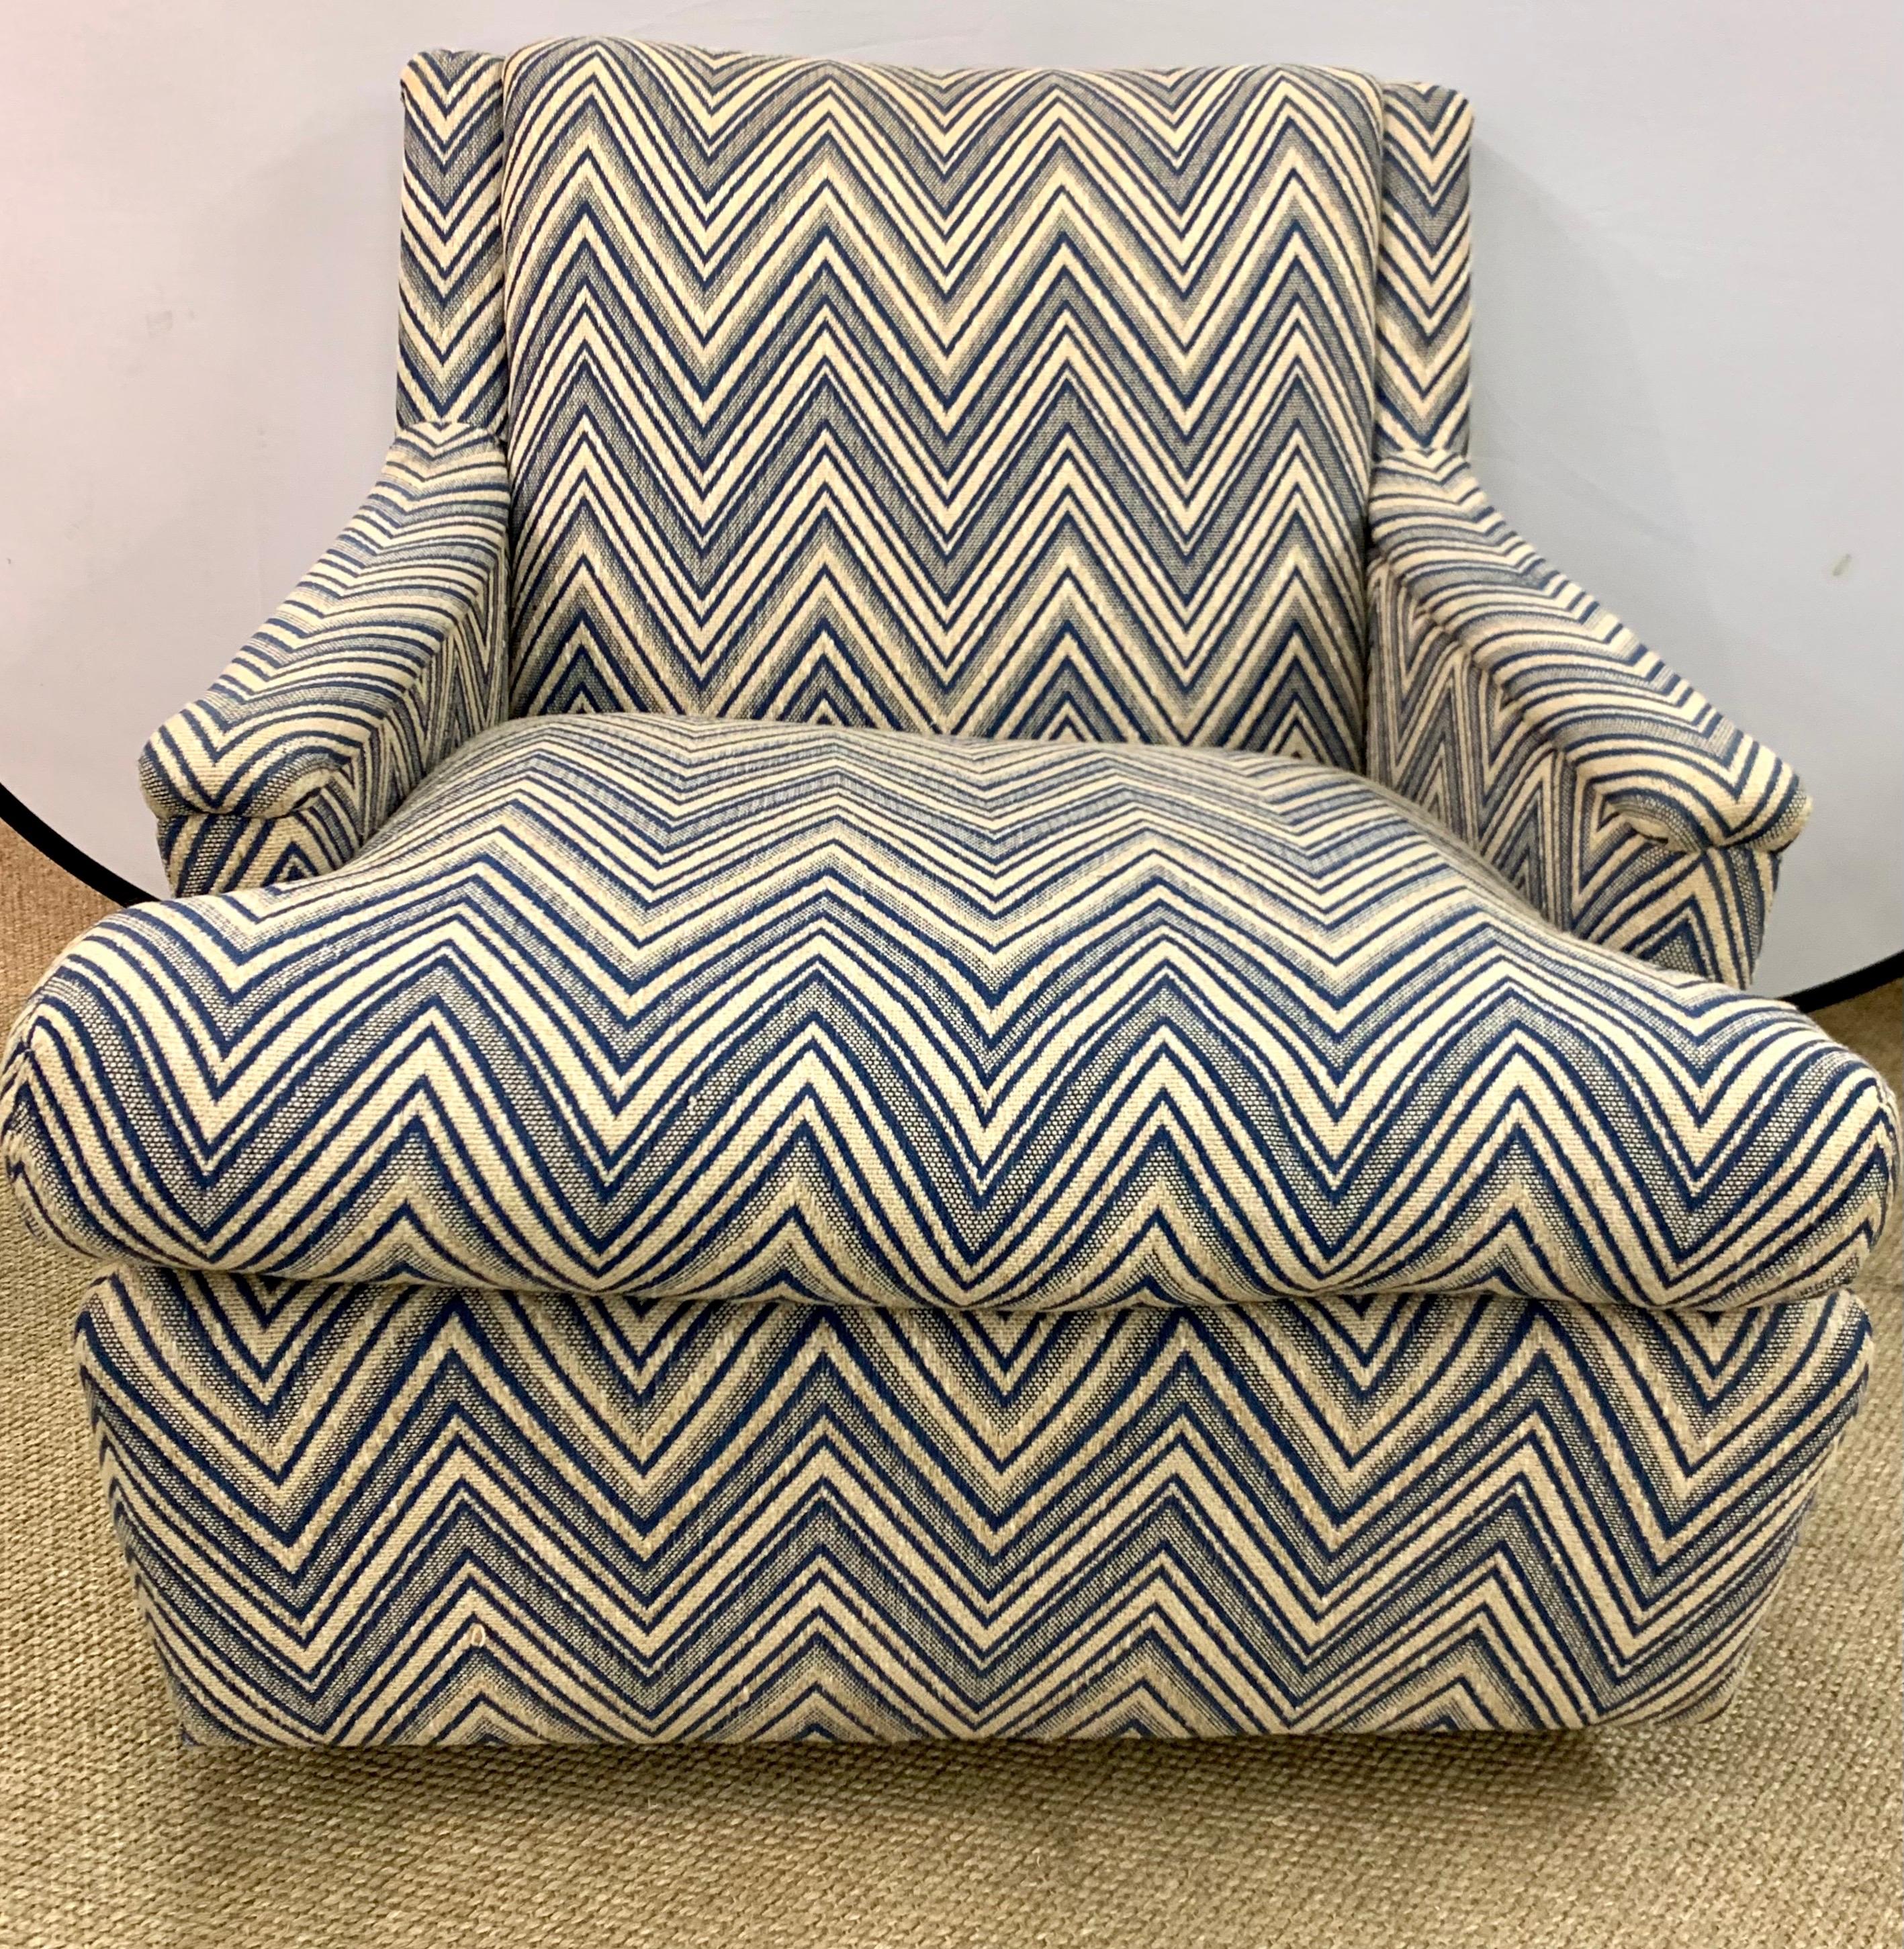 Newly upholstered in a tan and blue chevron fabric is this pair of mid century modern arm chairs. All dimensions are below. One of the most comfortable pair of chairs we've ever sat in. Fully refurbished. Now, more than ever, home is where the heart